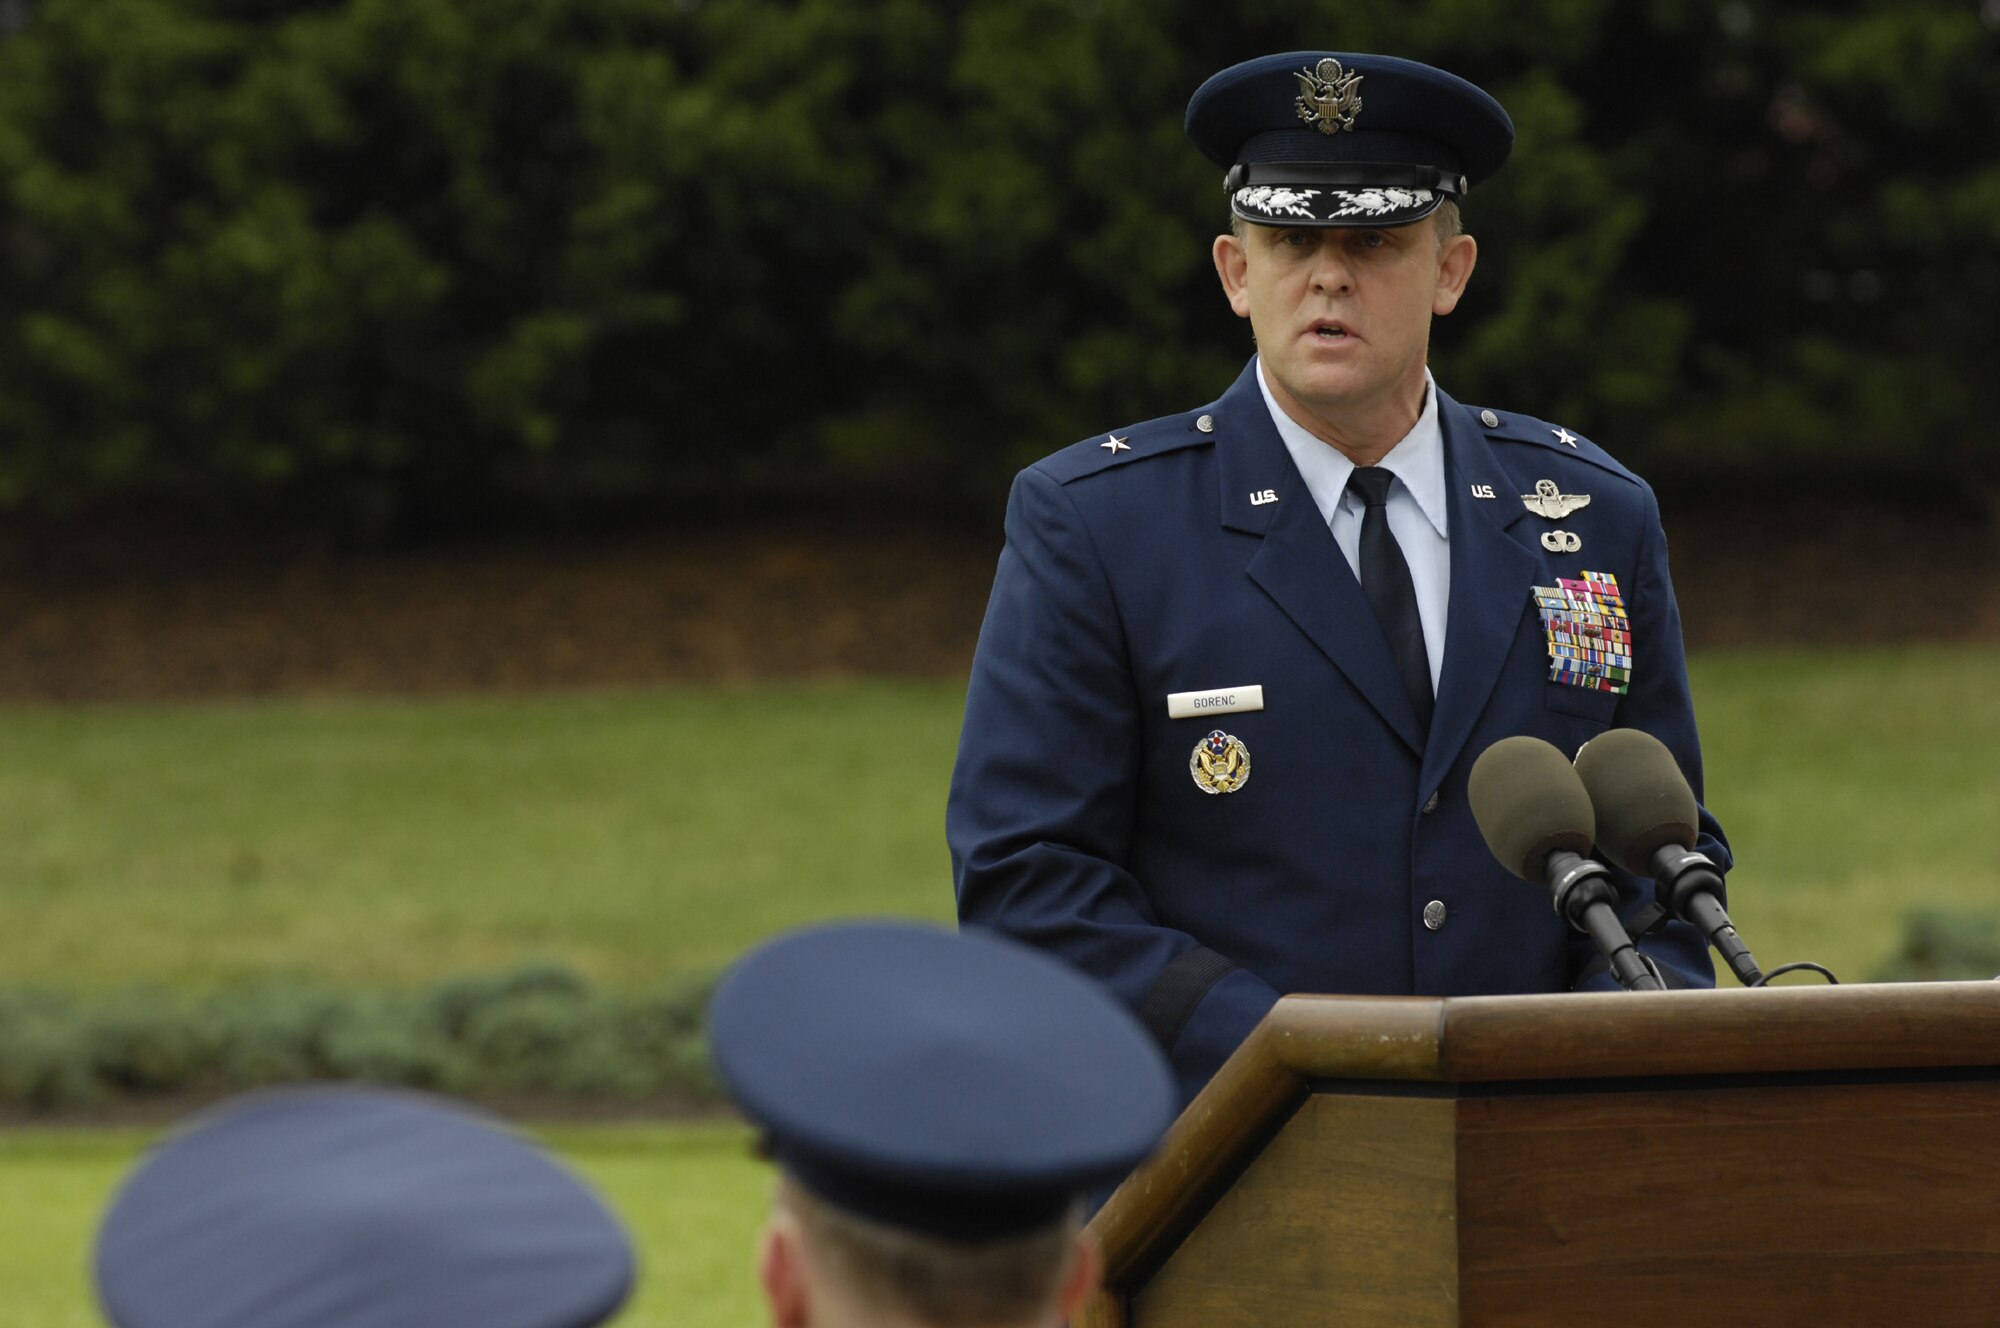 Brig. Gen. Frank Gorenc, Air Force District of Washington commander, delivers his first speech after assuming command of AFDW from Maj. Gen. Robert L. Smolen at the June 29 on the U. S. Air Force Ceremonial Lawn on Bolling. (U.S. Air Force photo by Senior Airman Dan DeCook)